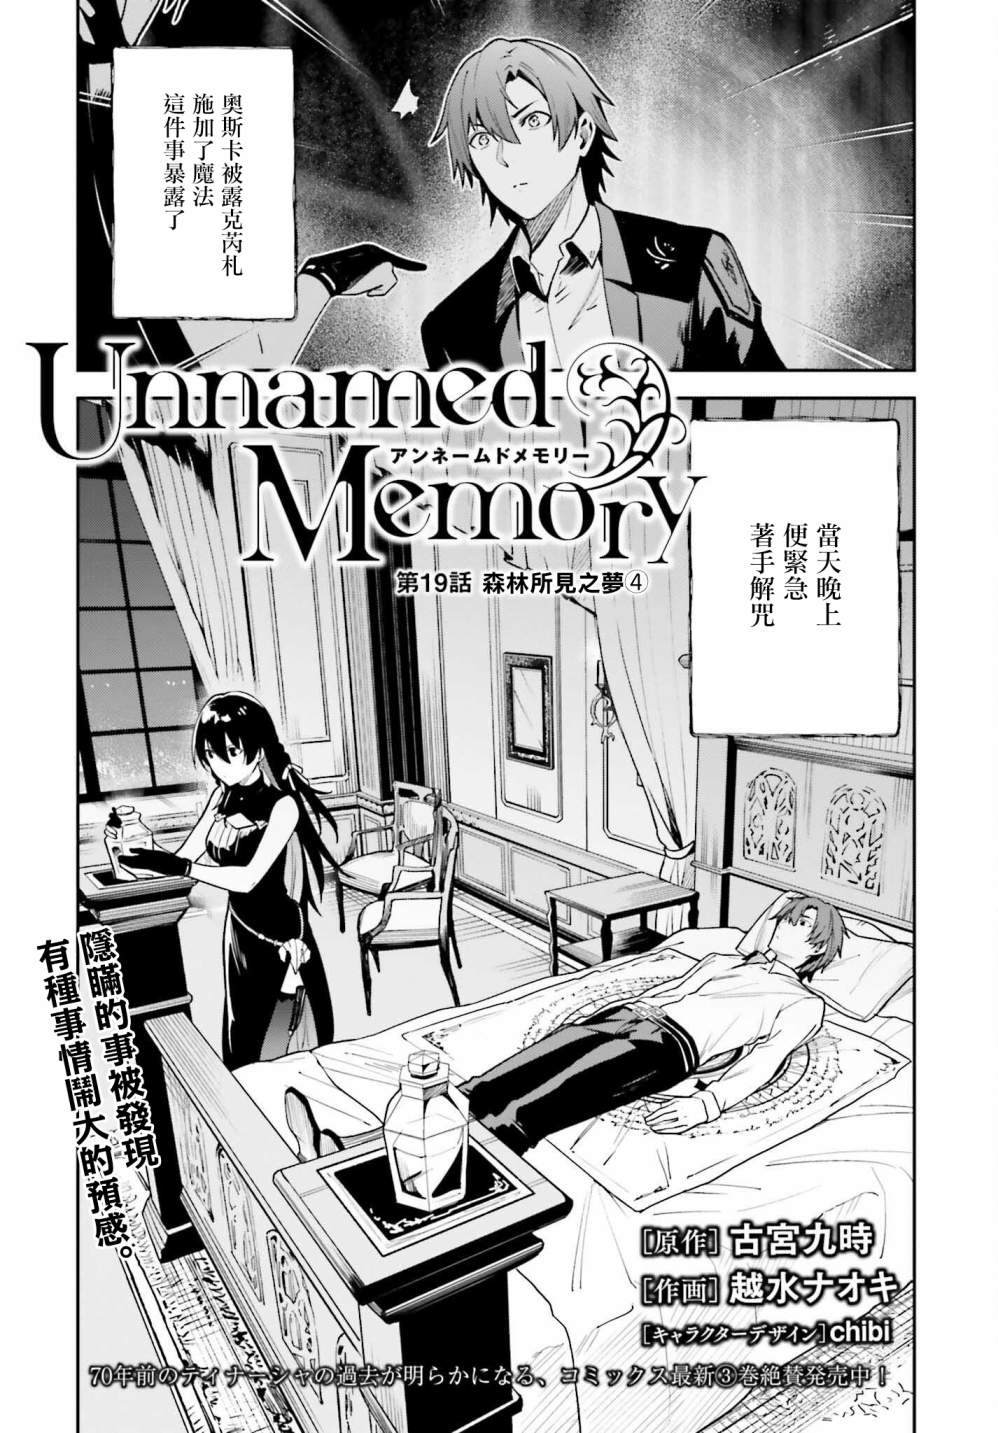 Unnamed Memory - 第19話 - 1